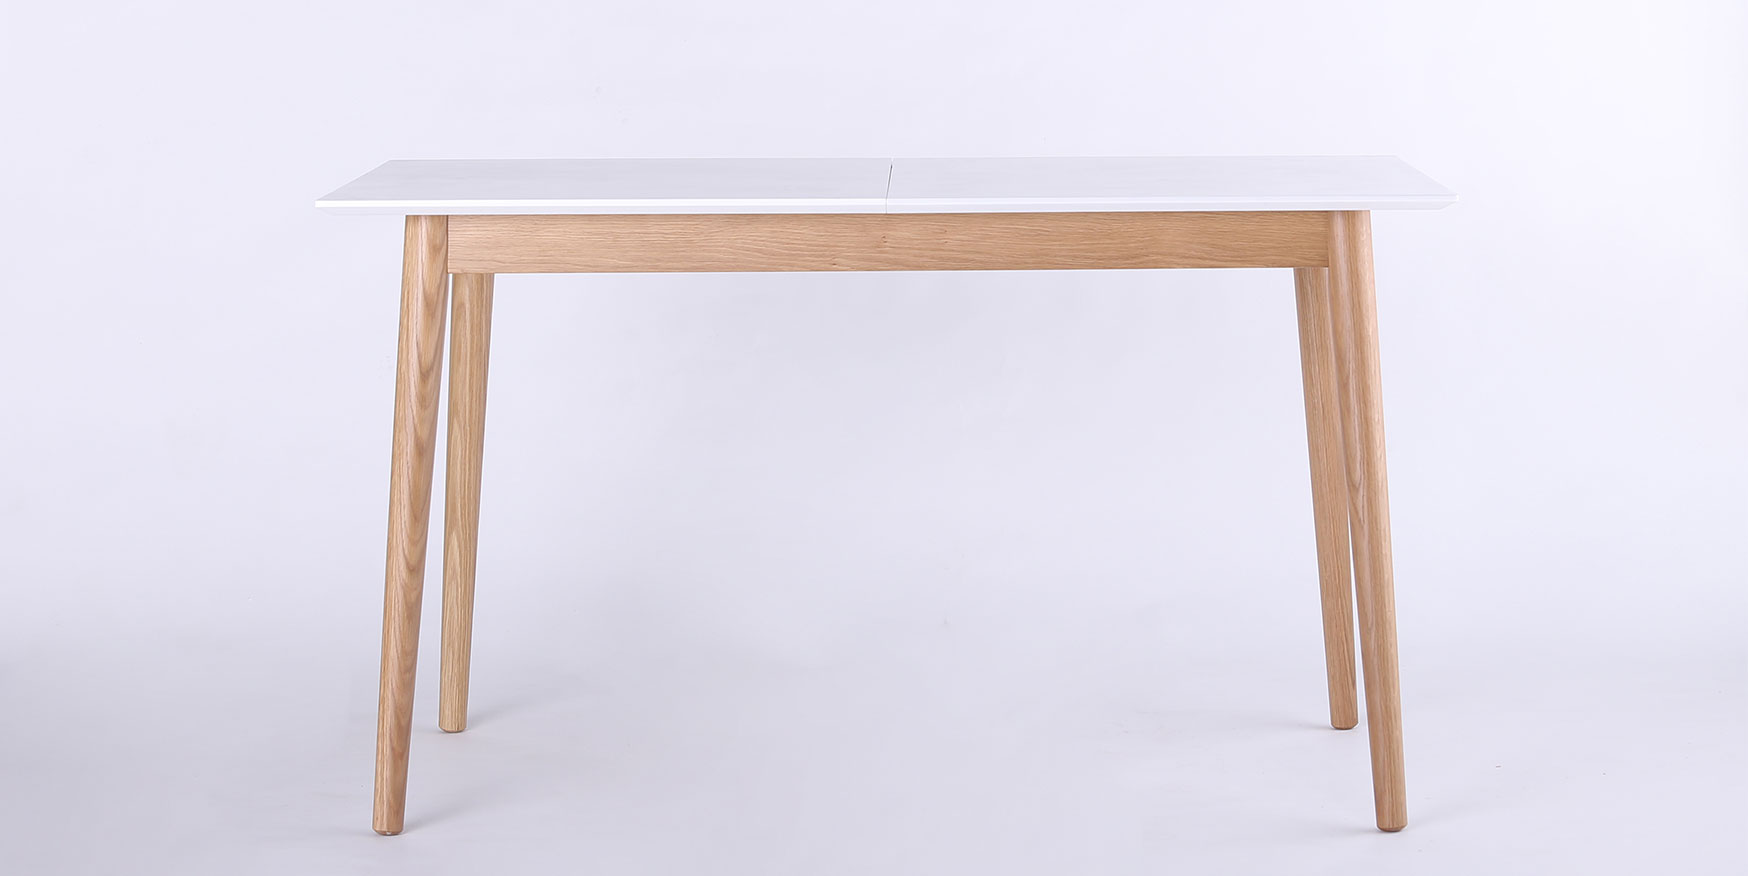 DT3-F/Y Dining Table Modern Nordic Wooden Table Extend Table